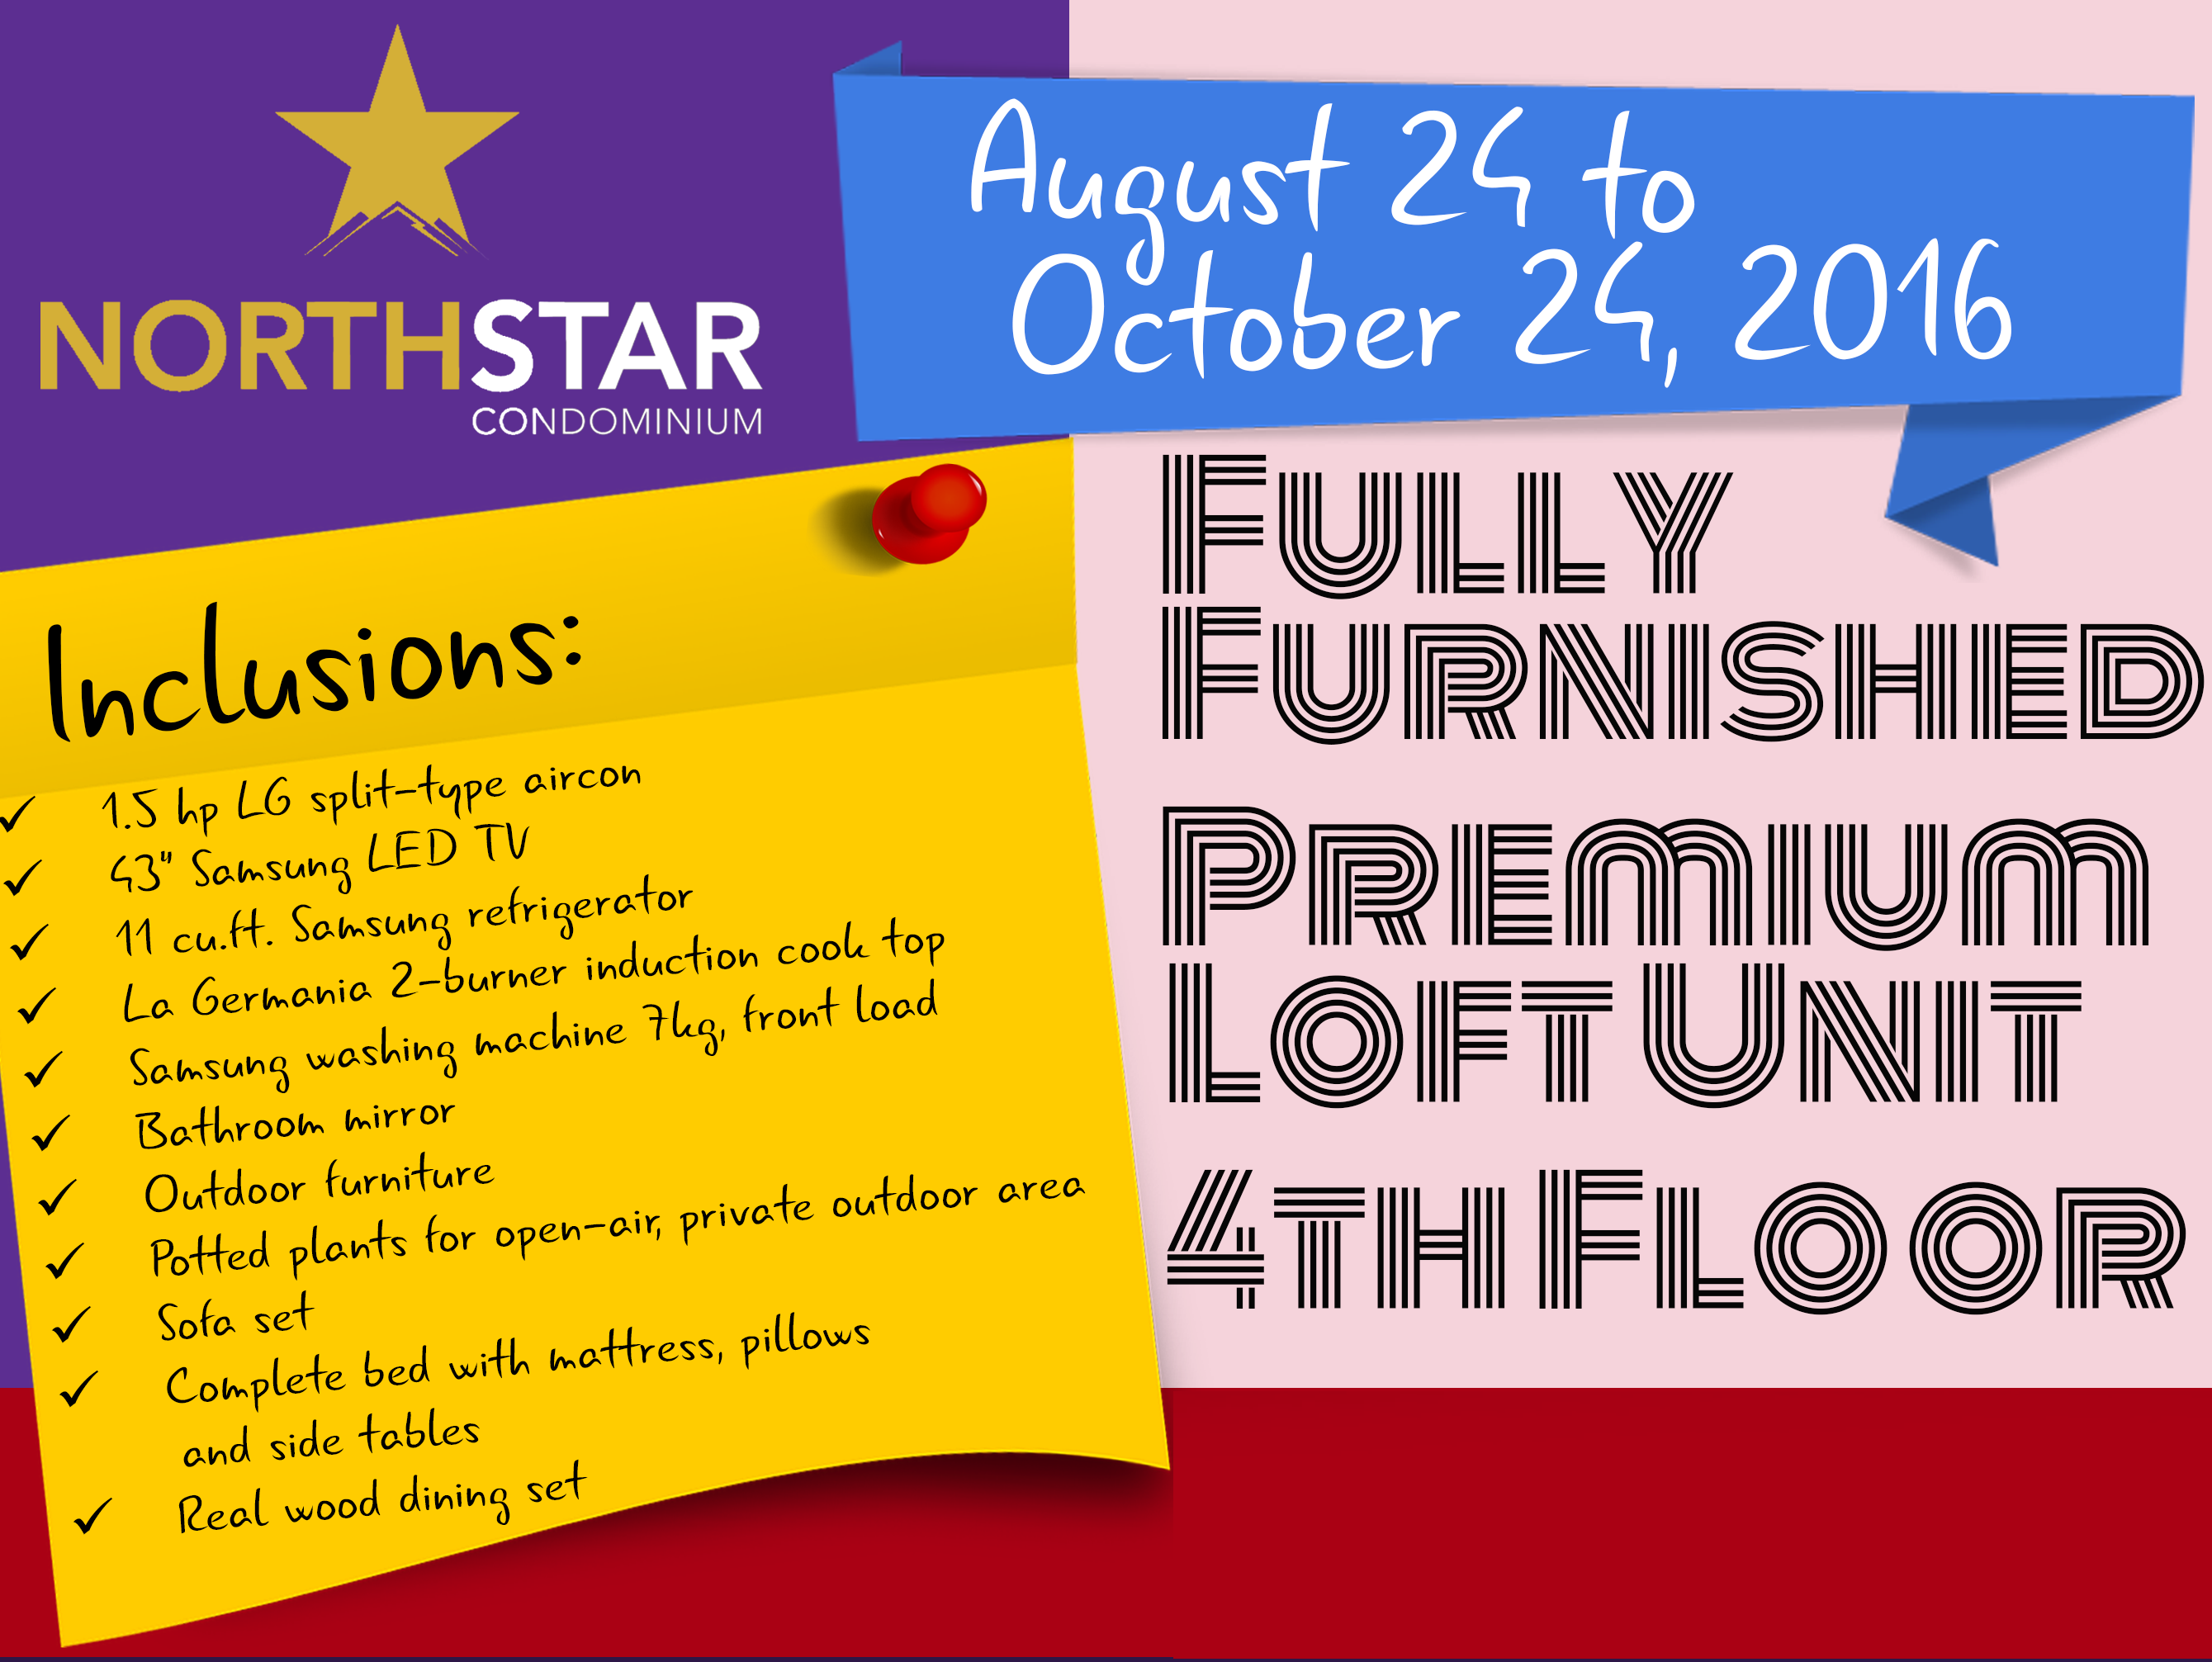 northstar-fully-furnished-podium-loft-from-august-october-2016